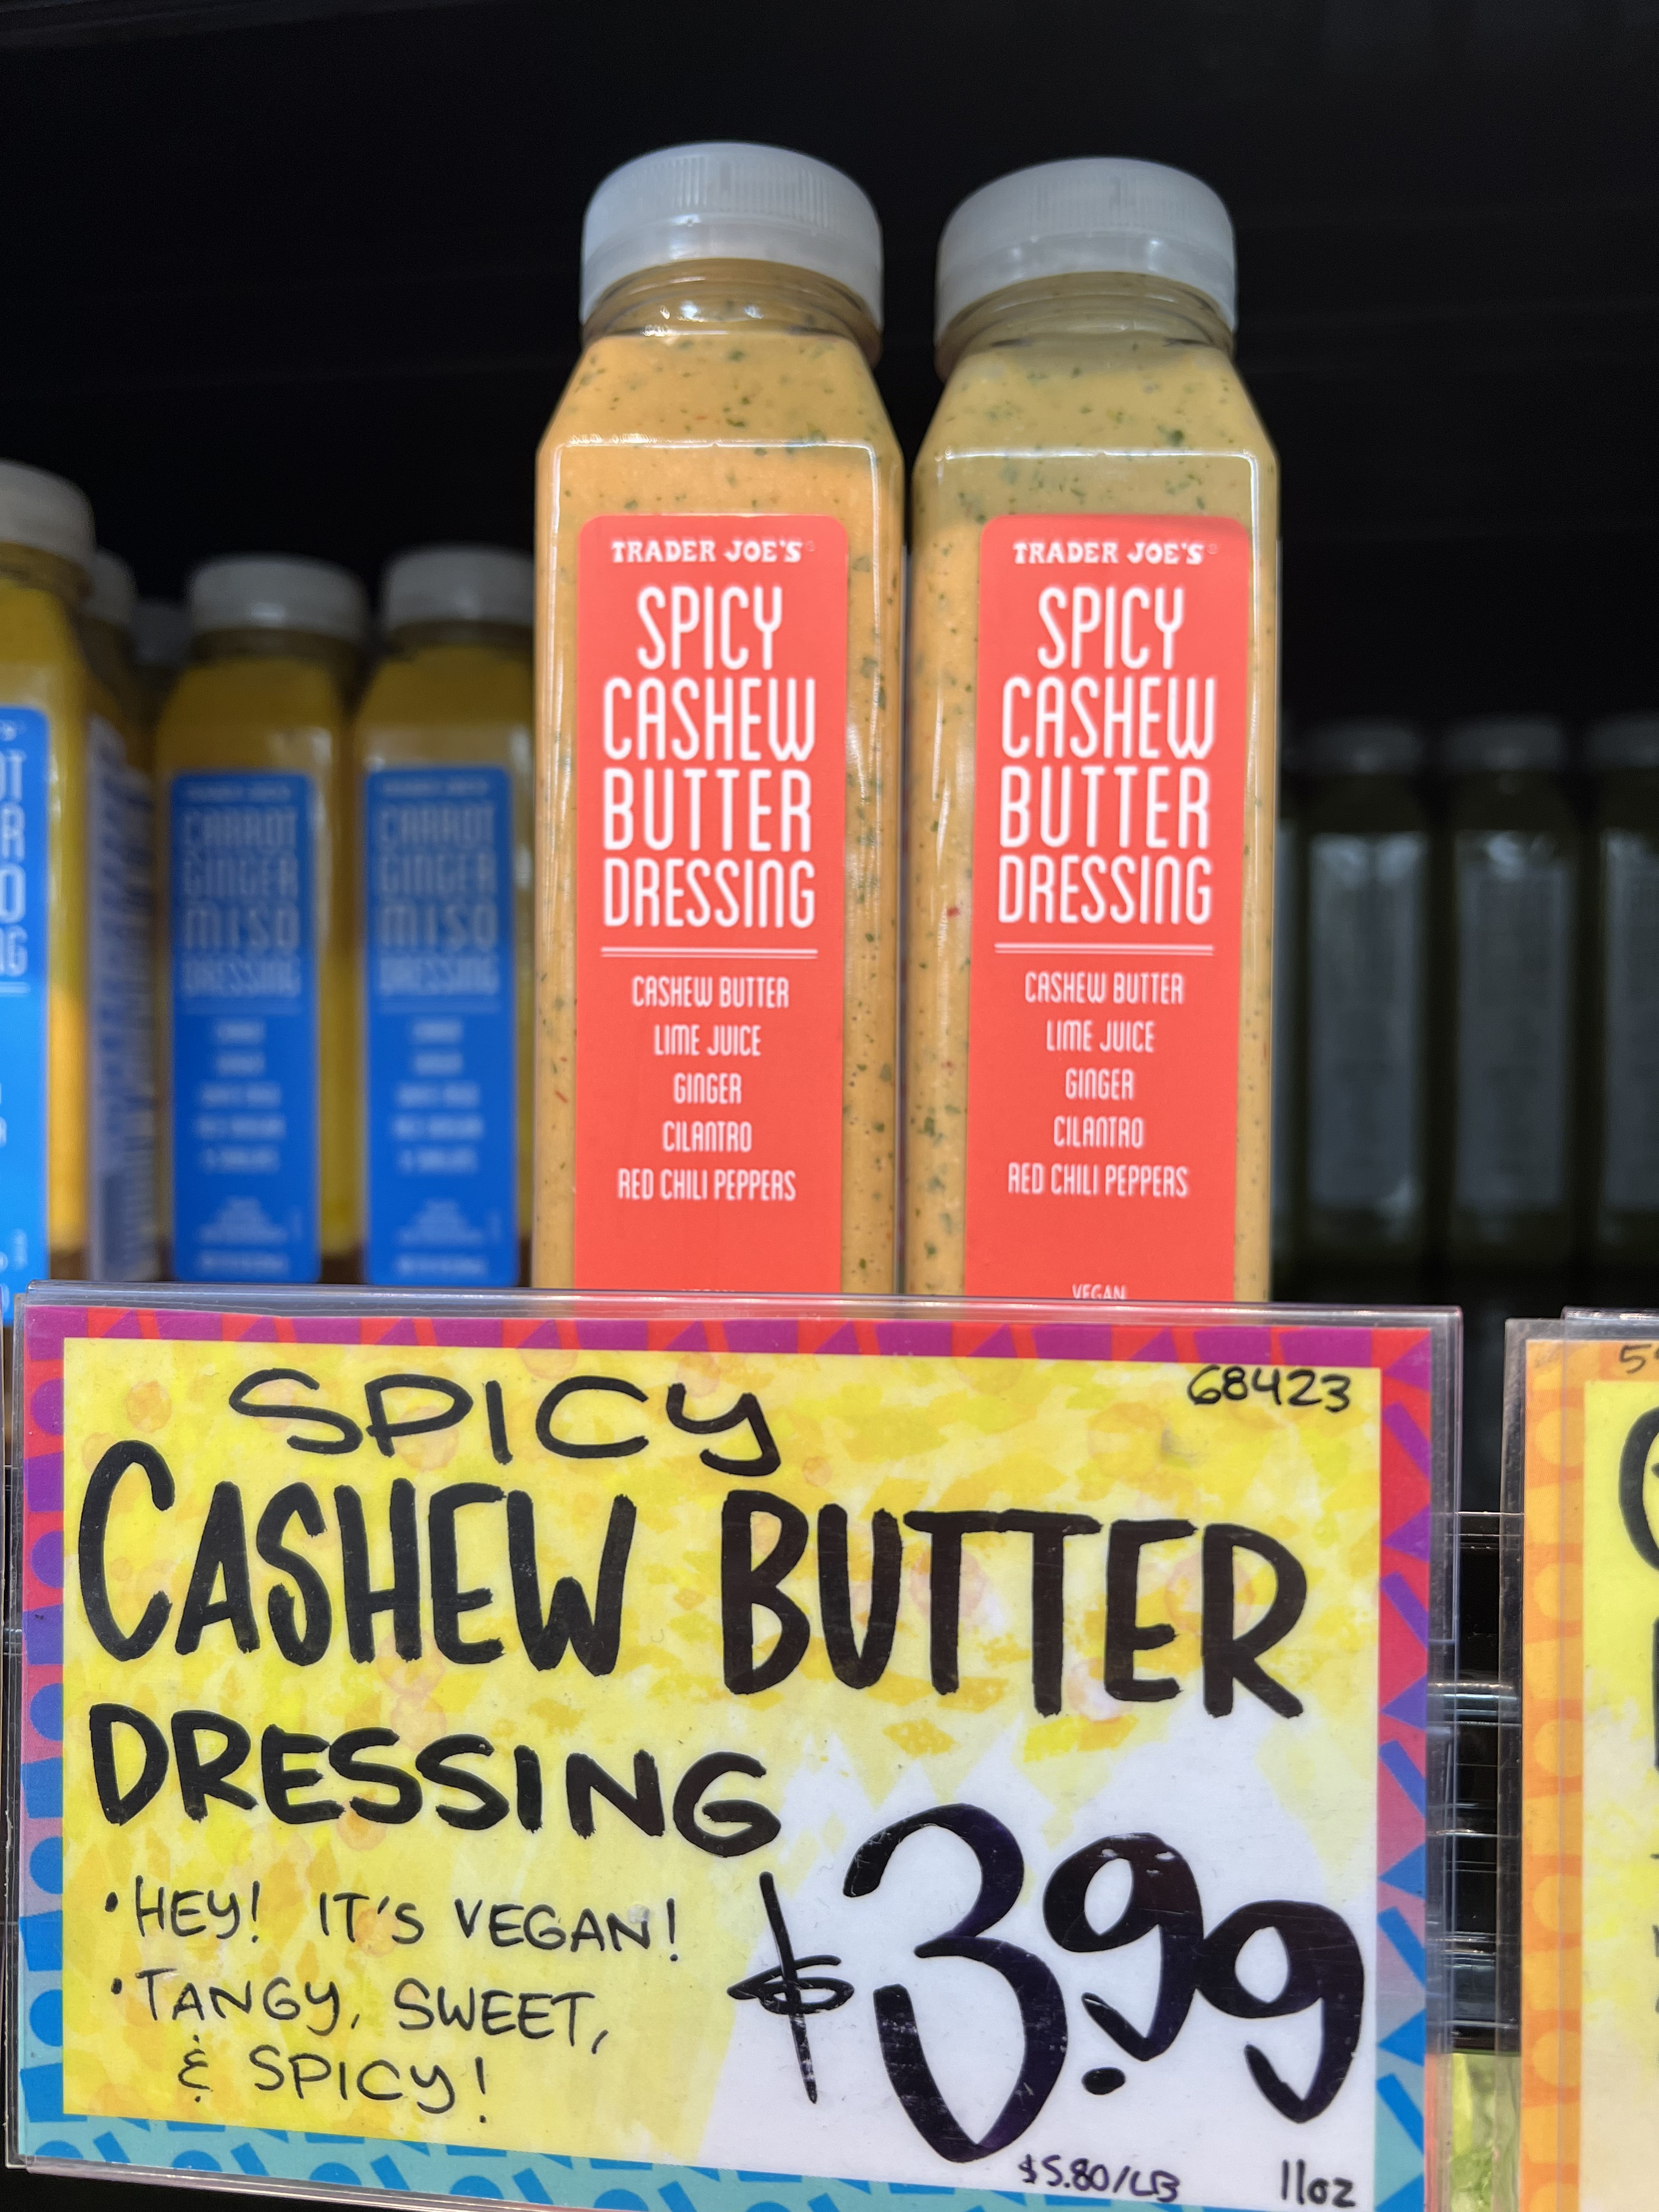 Spicy Cashew Butter Dressing